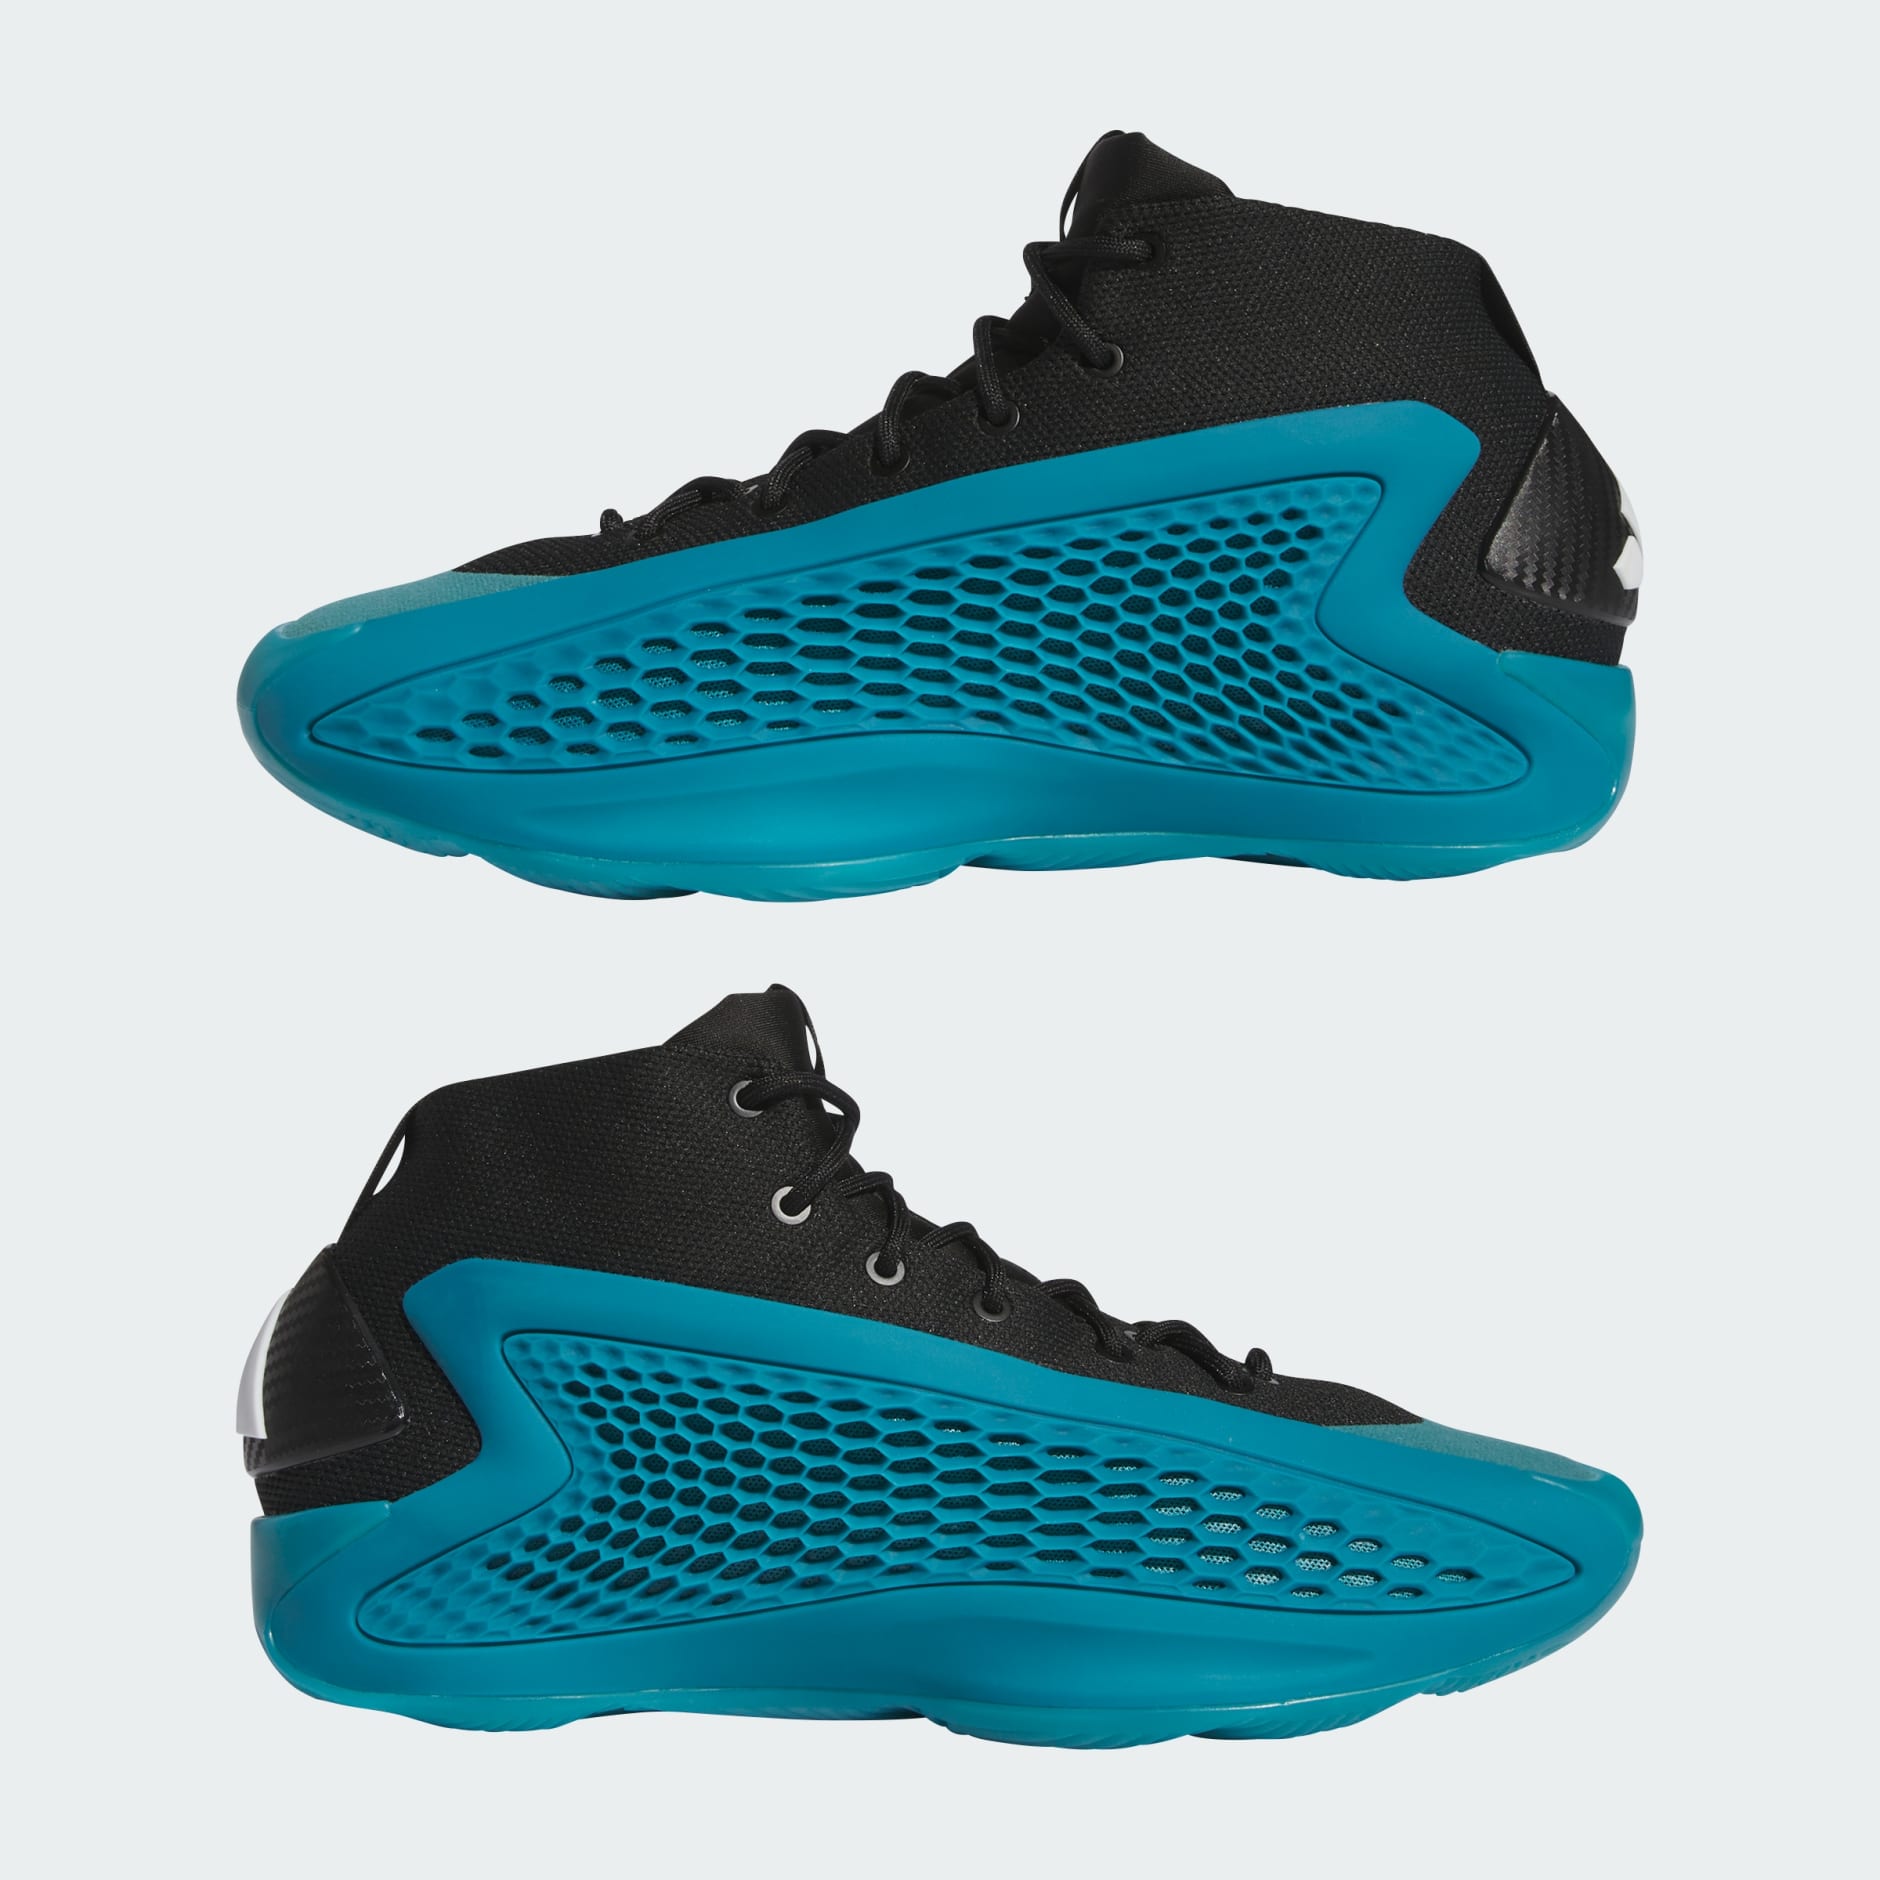 Shoes - AE 1 New Wave Basketball Shoes - Turquoise | adidas South Africa